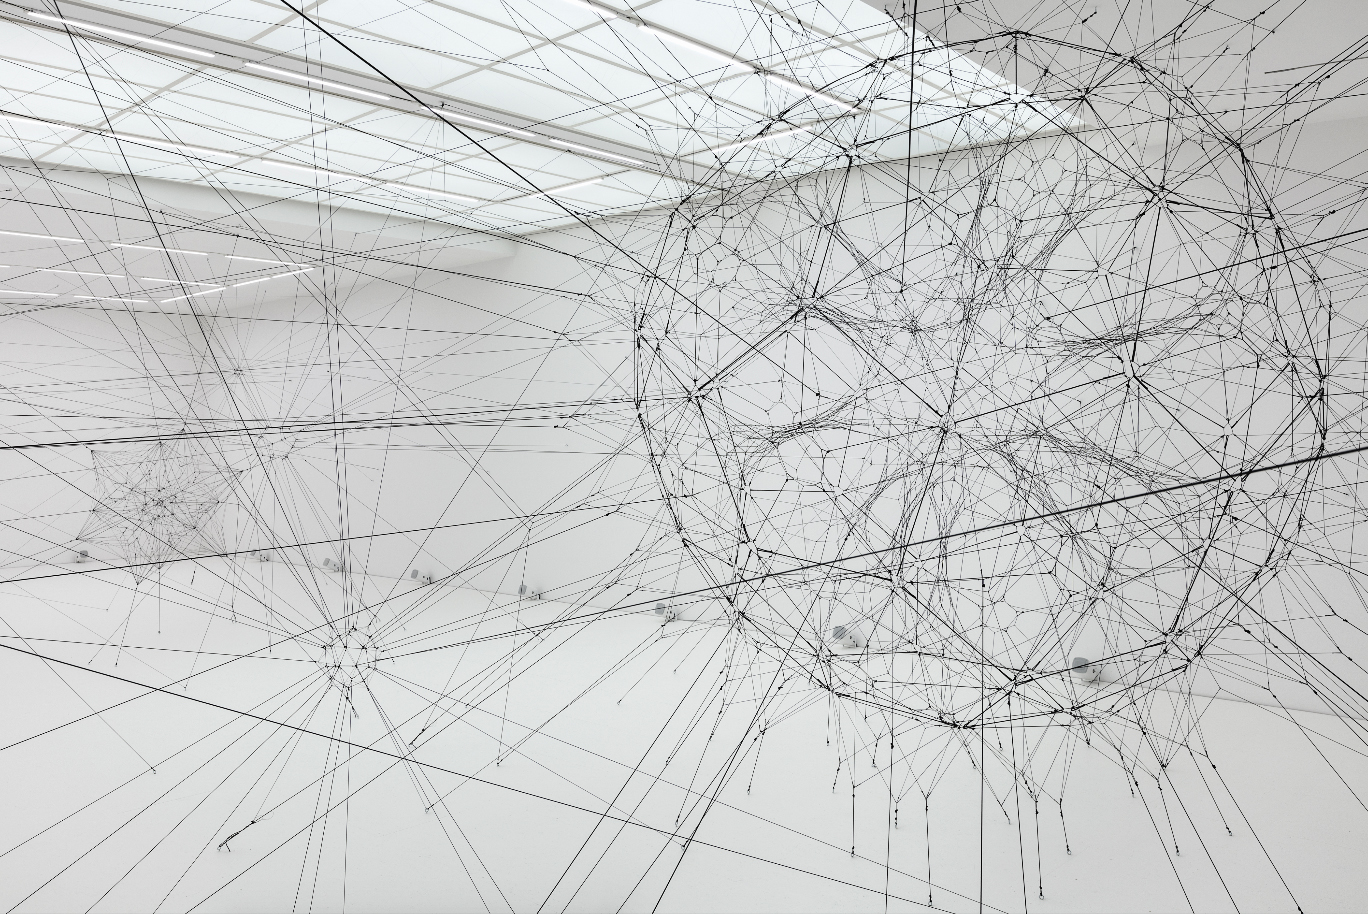 An exhibition view of Tomás Saraceno's Algo-r(h)i(y)thms at Esther Schipper, Berlin, 2019.